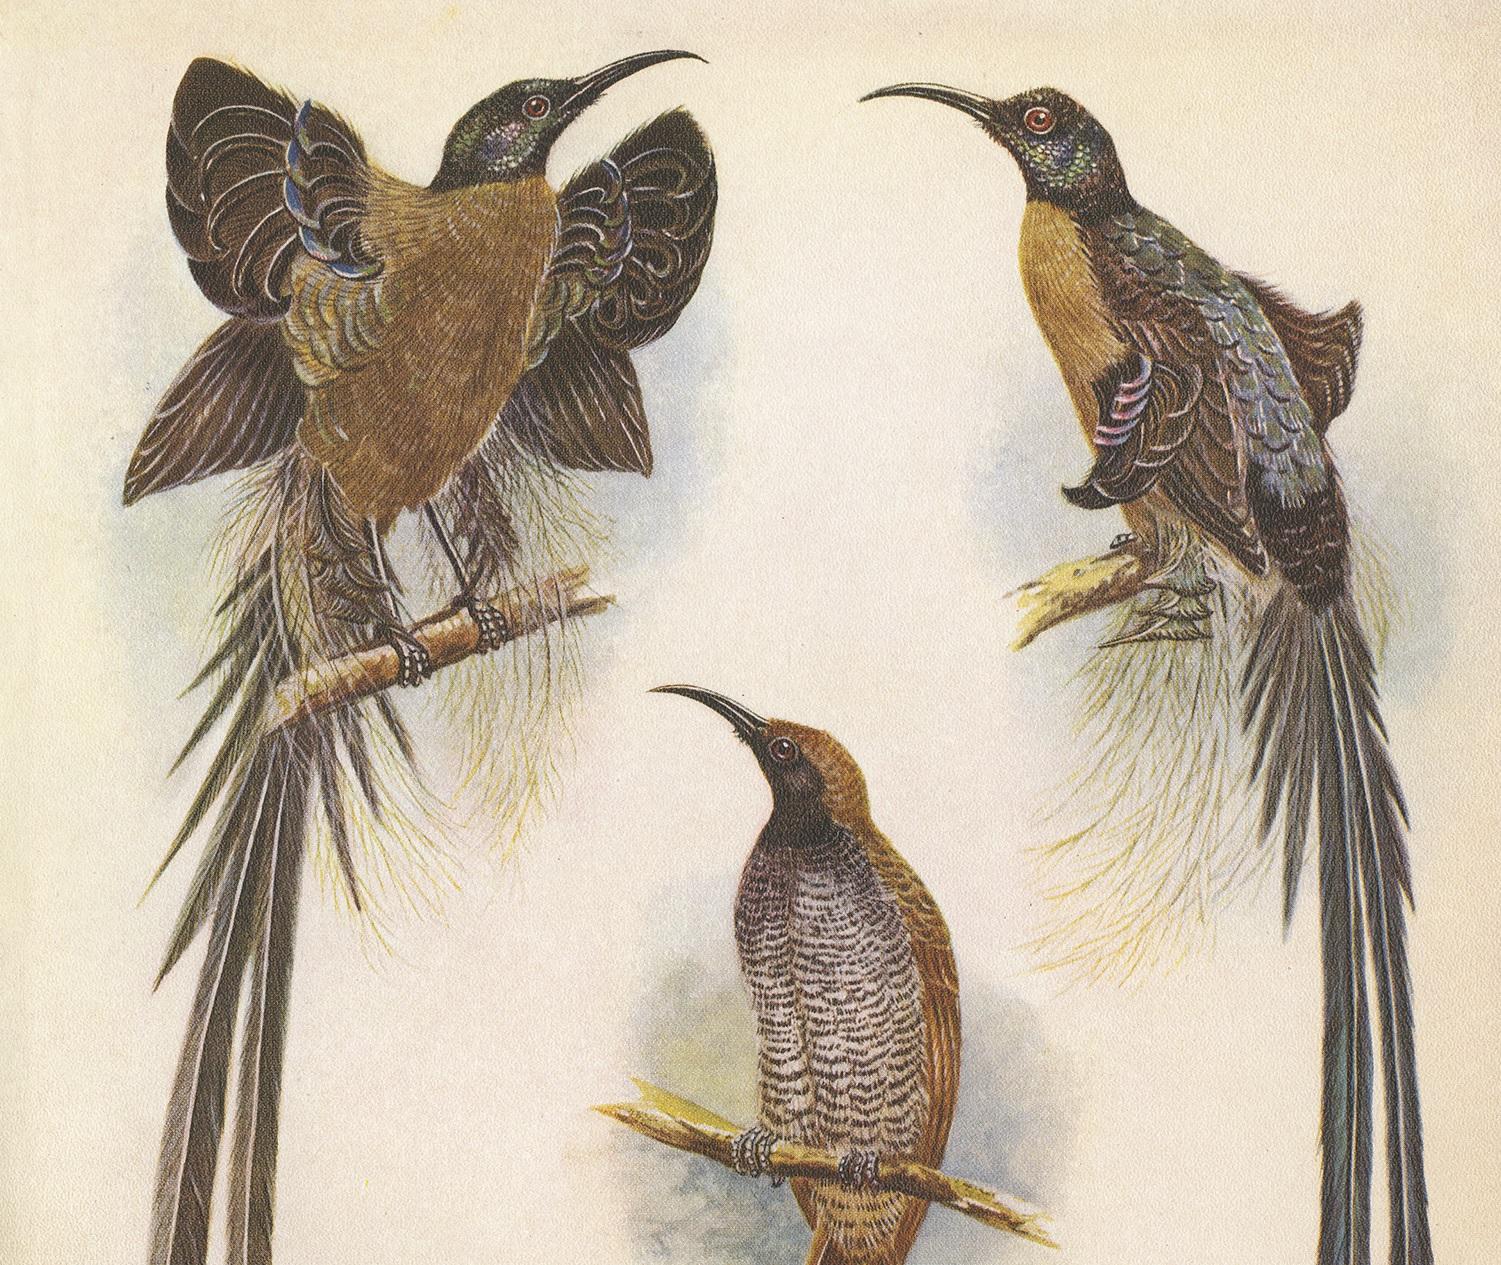 Decorative print illustrating Meyer's Sickle Bill and the Greater Sickle Bill. This authentic print originates from 'Birds of Paradise and Bower Birds' by Tom Iredale. With colored illustrations of Every Species by Lilian Medland. Published in 1950.